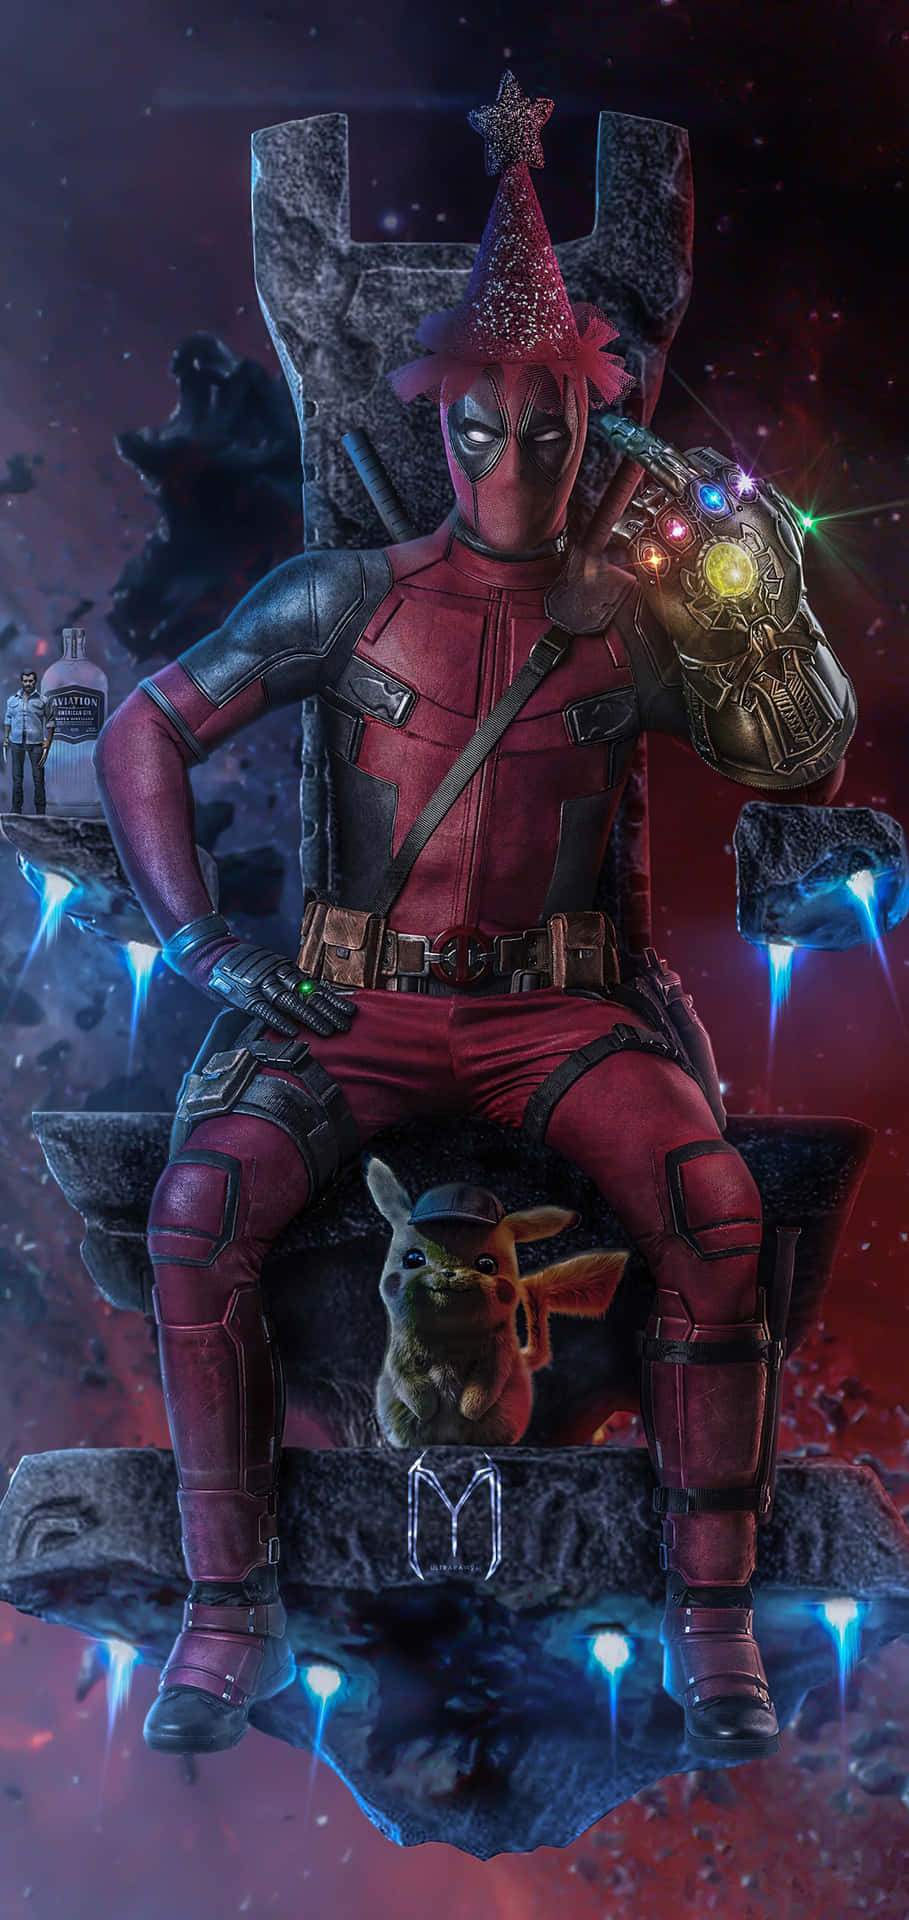 Get Your Own Deadpool iPhone; Spice Up Your Conversation Wallpaper